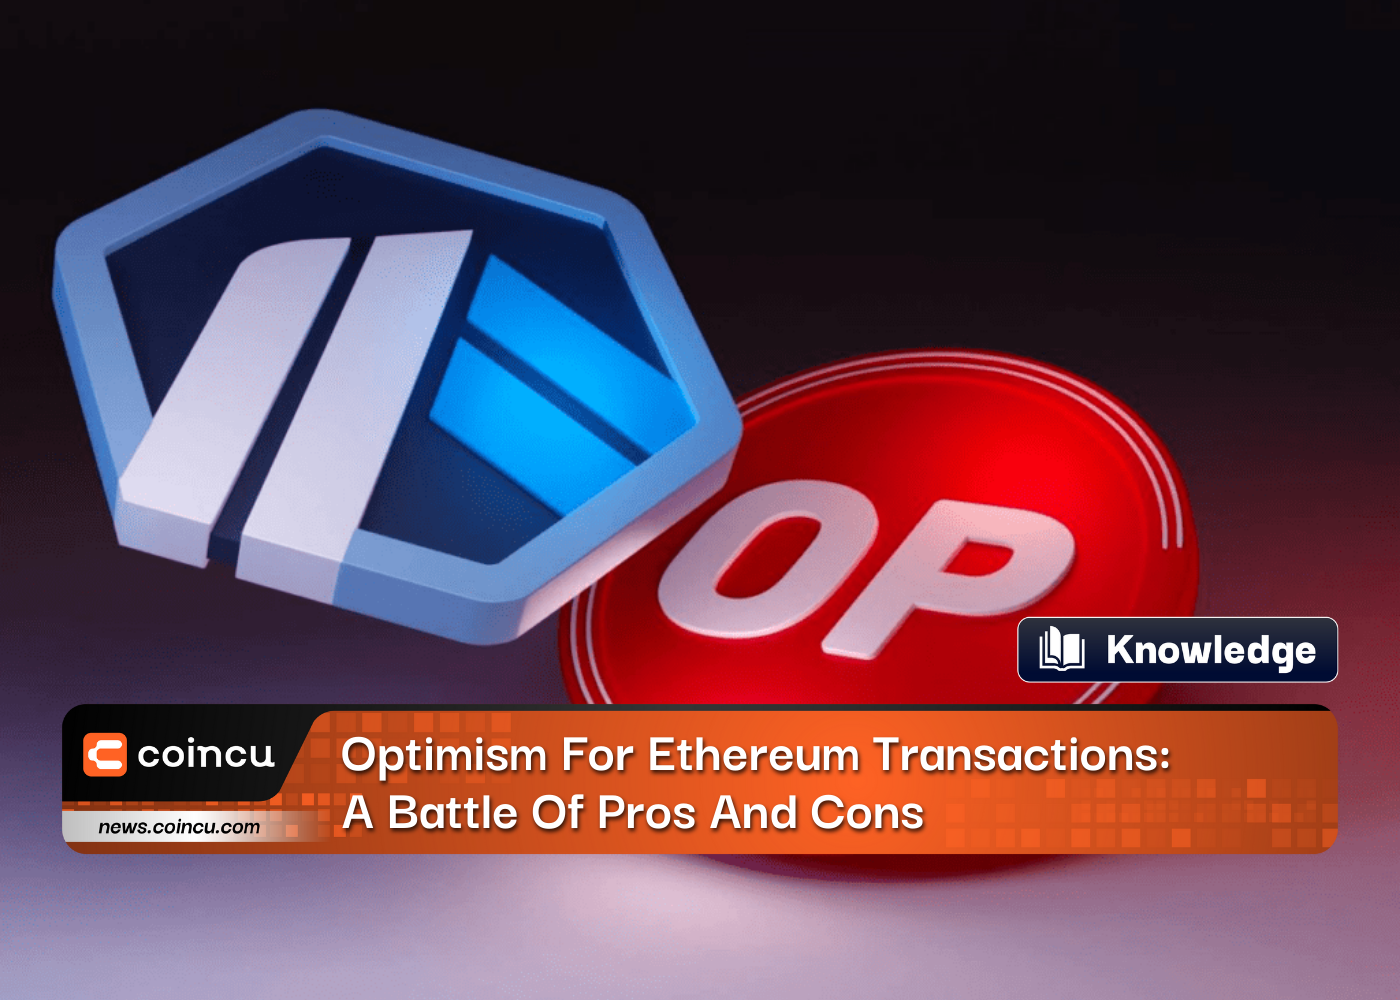 Optimism For Ethereum Transactions: A Battle Of Pros And Cons